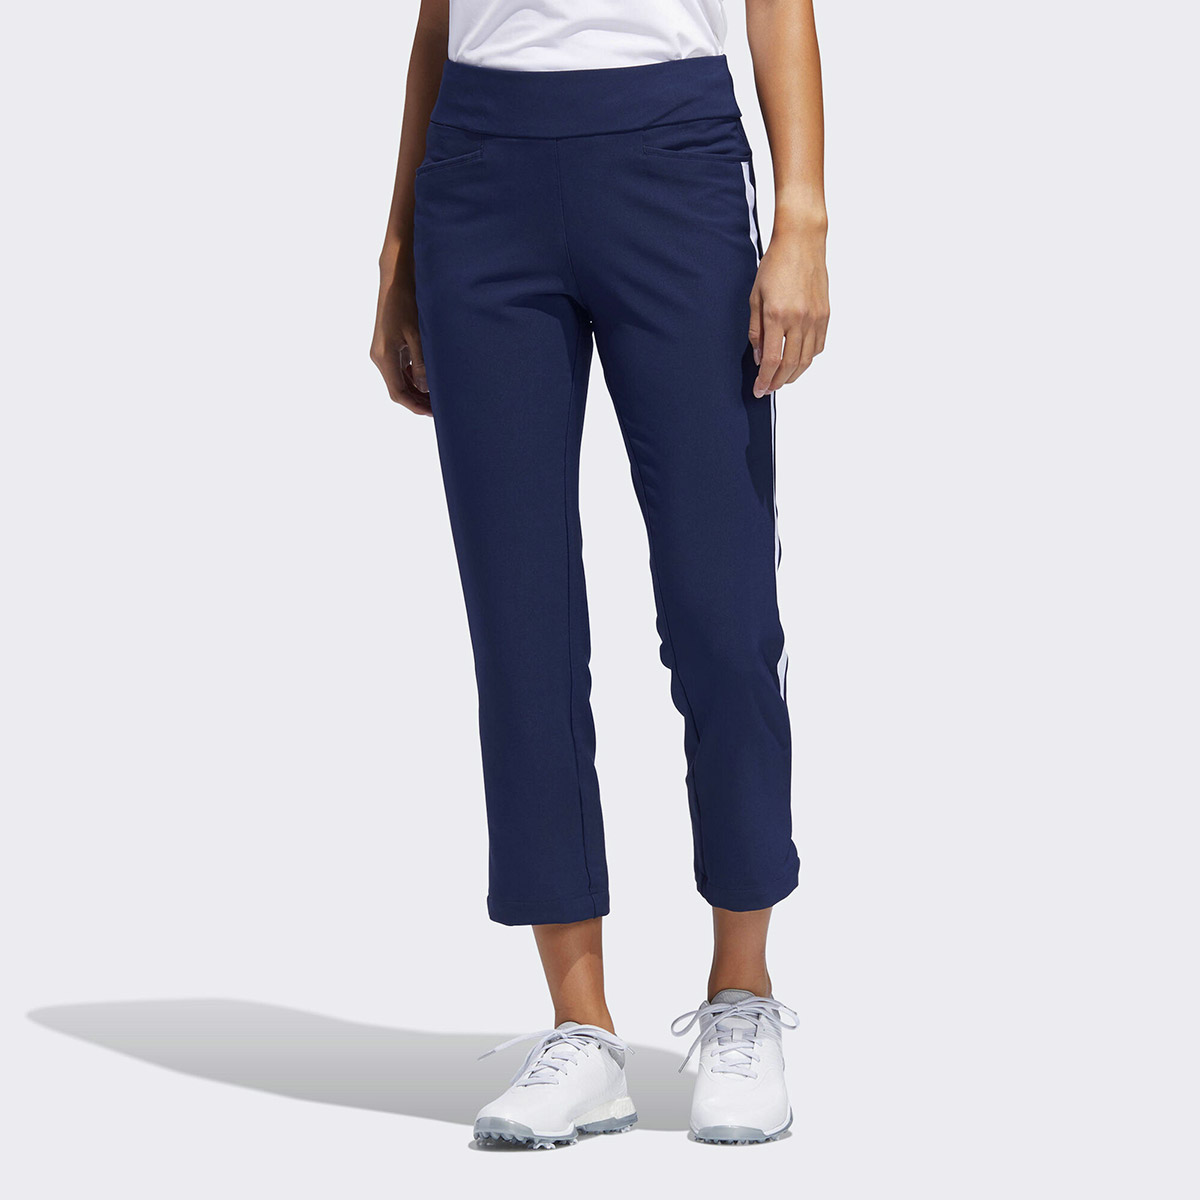 adidas Golf Novelty Flair Cropped Ladies Trousers from american golf